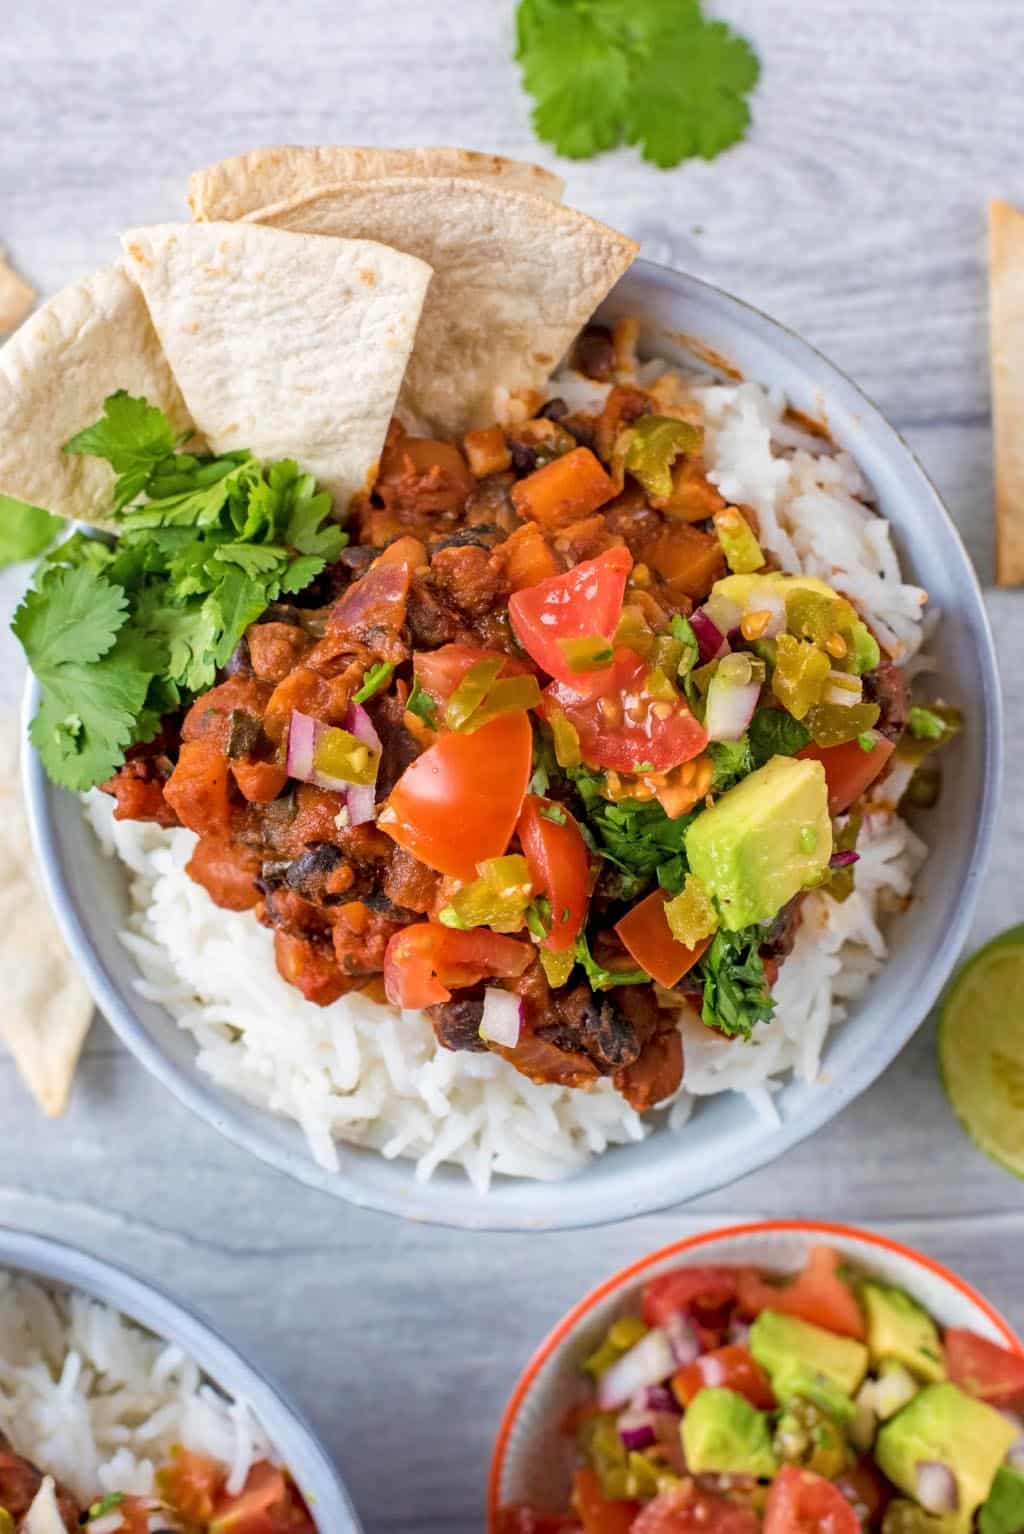 Bean Chilli and rice in a bowl.